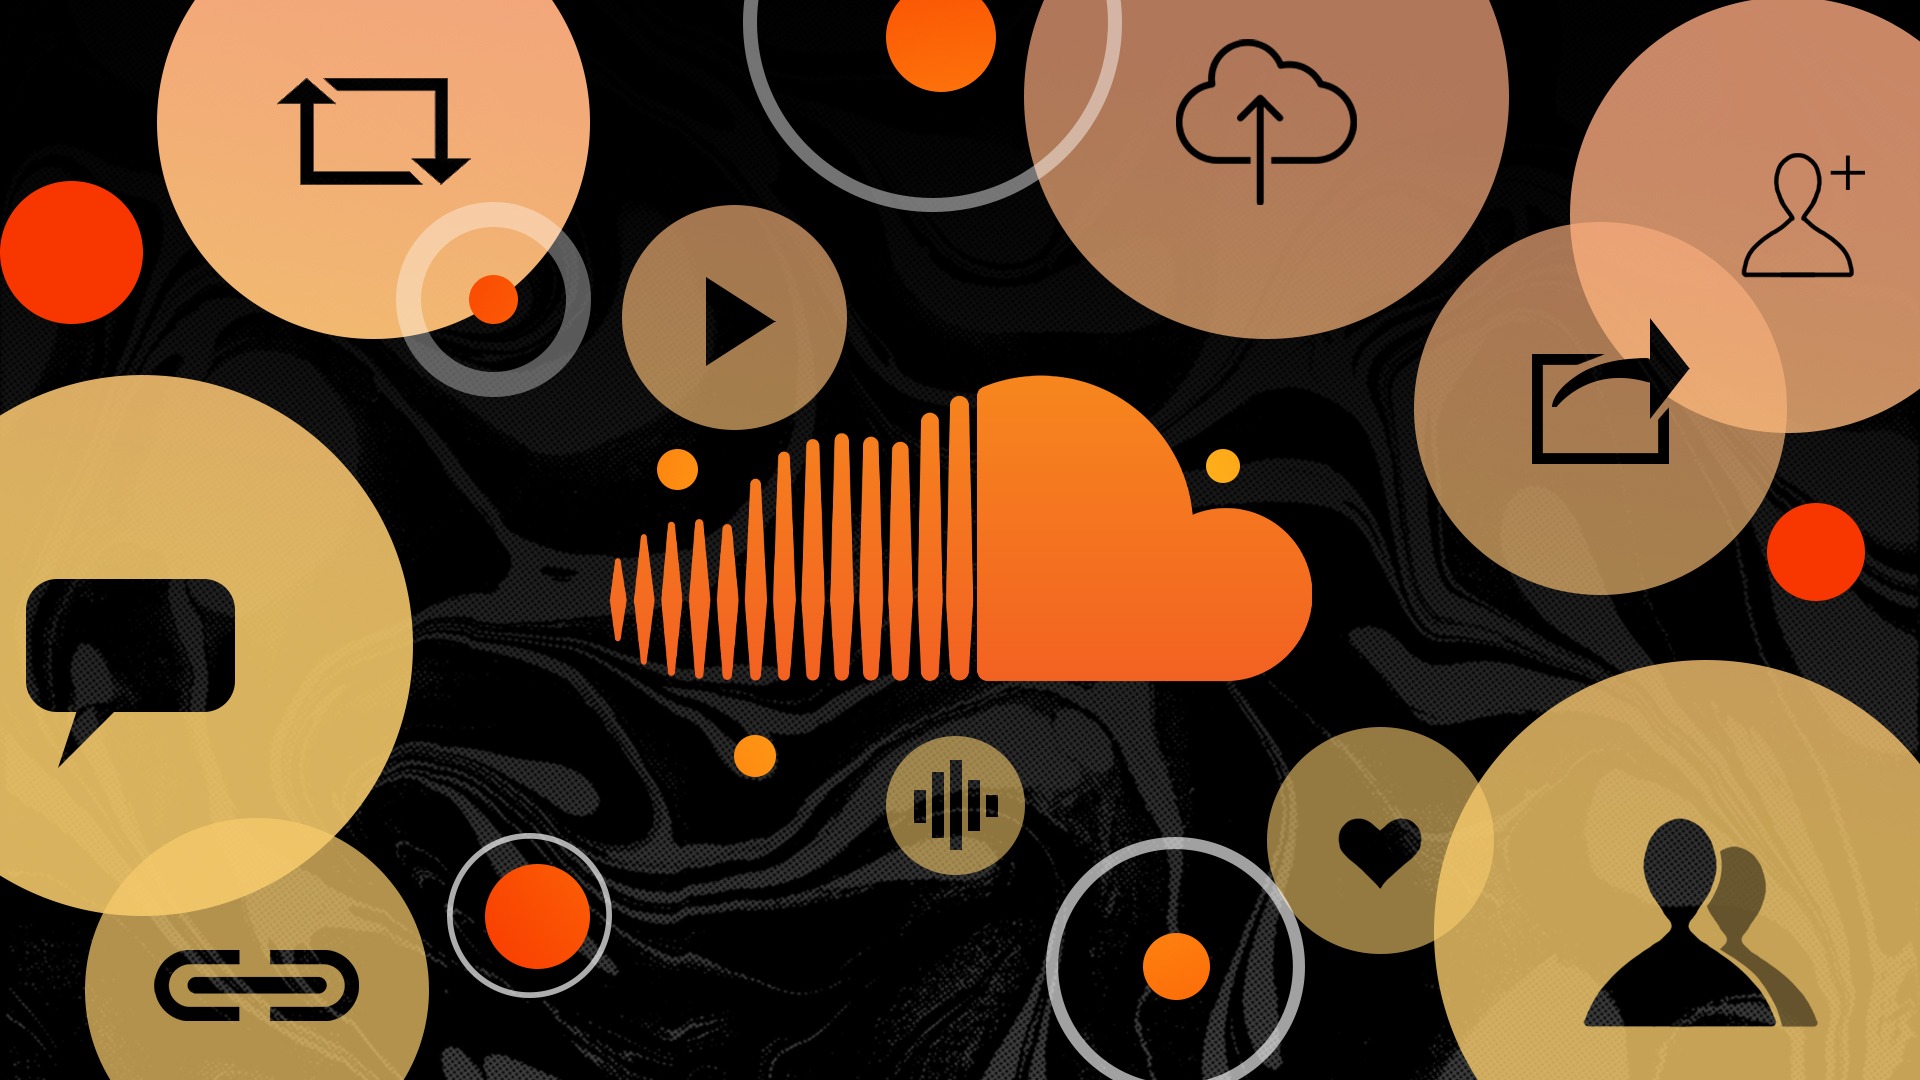 Music tracks, songs, playlists tagged Becka on SoundCloud